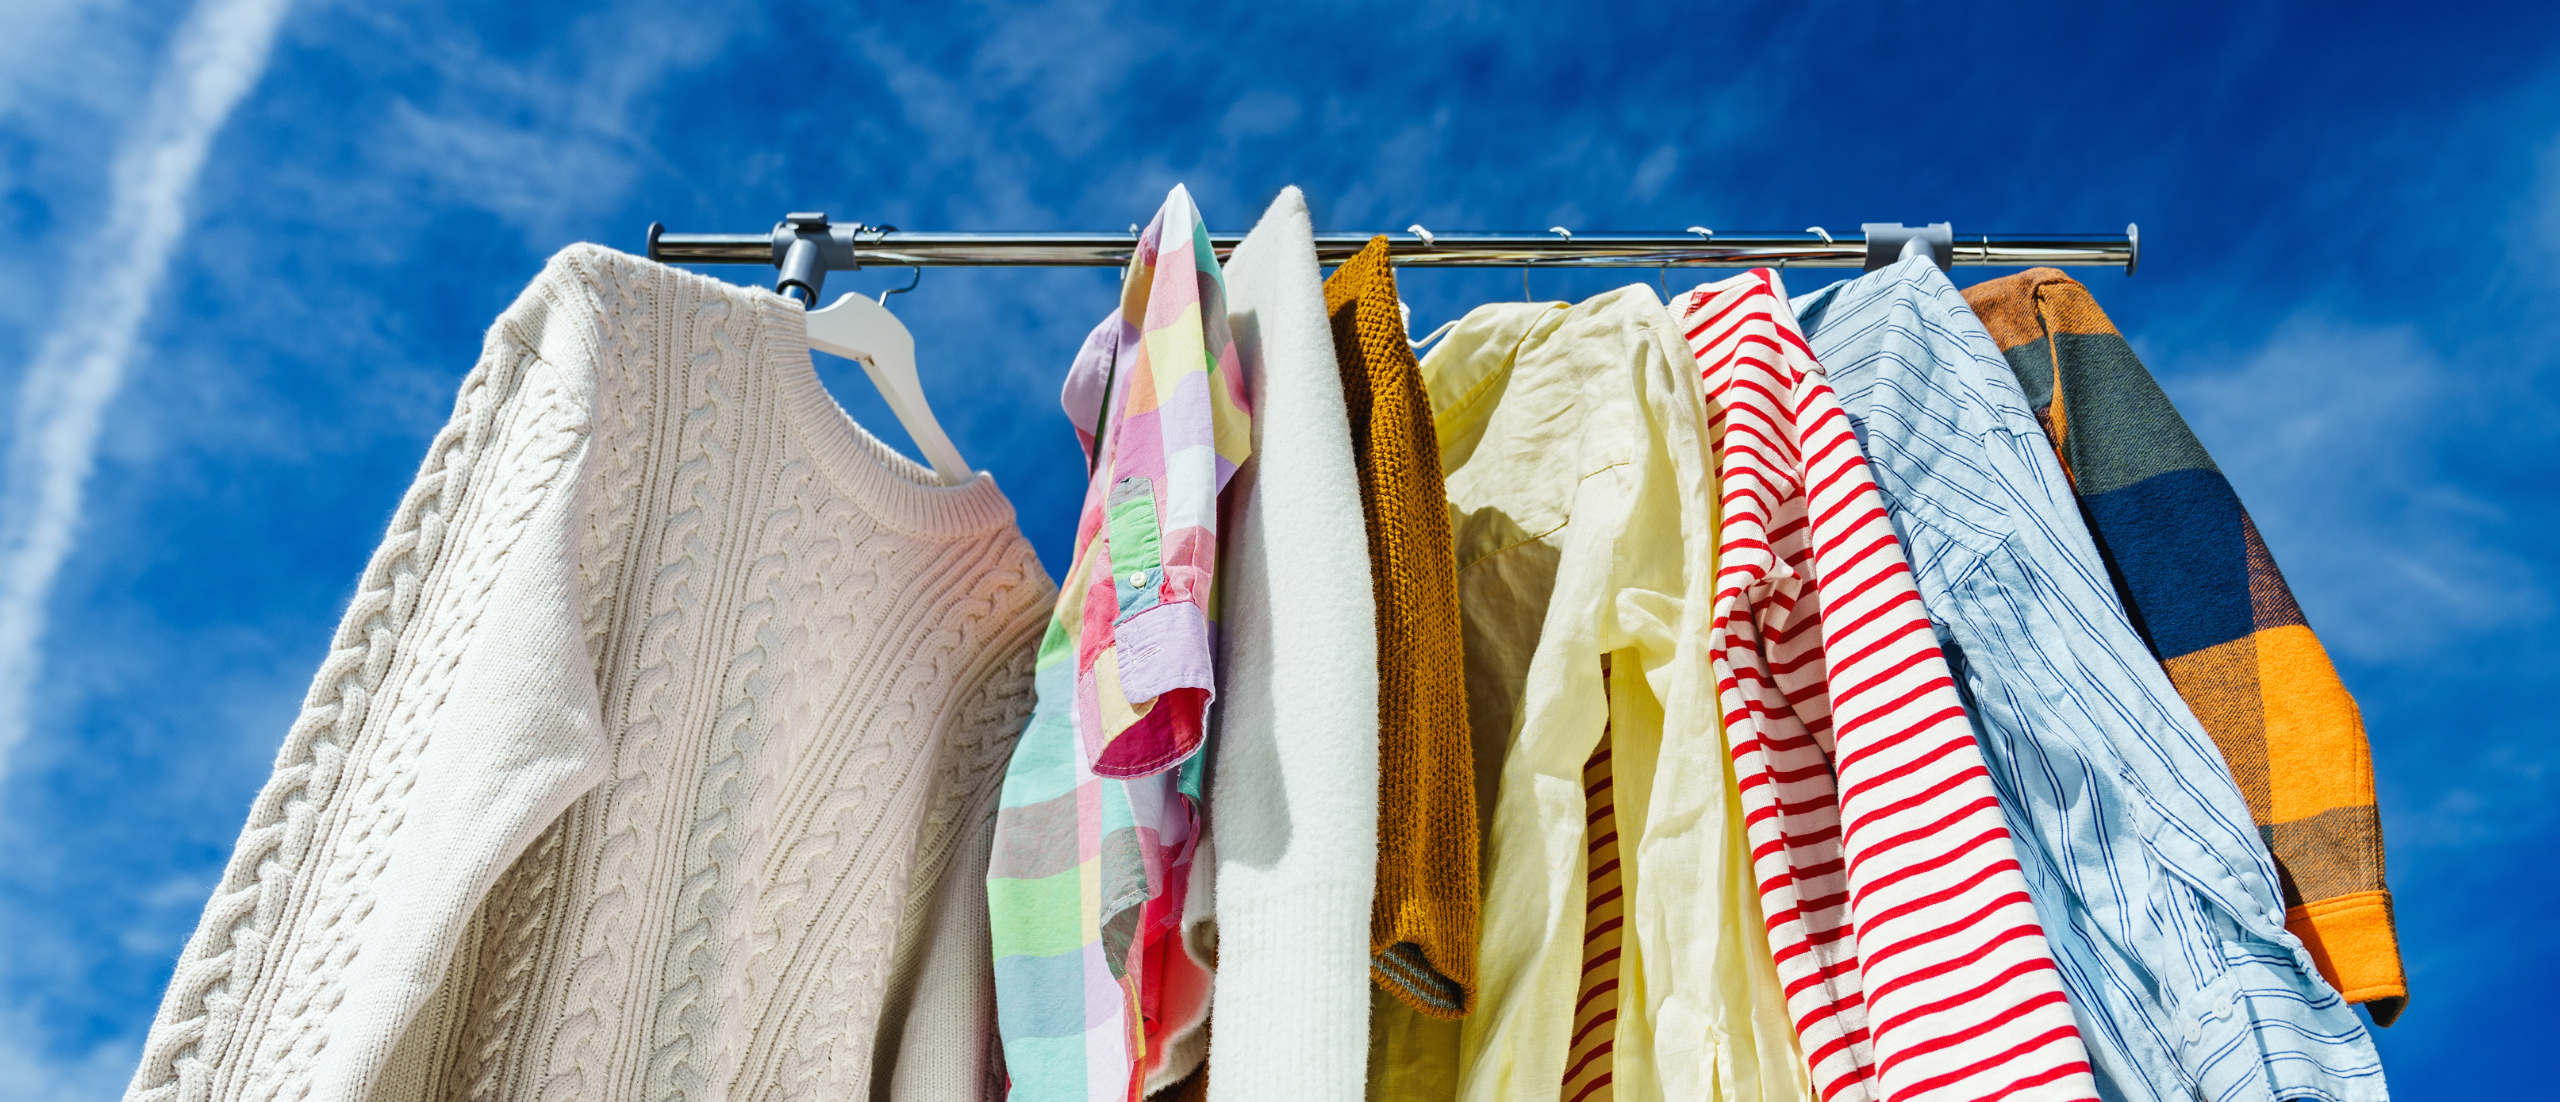 Clothing on a rack with bright blue sky in the background. Blog post explores key sustainability predictions for 2024 that could influence the future of fashion.